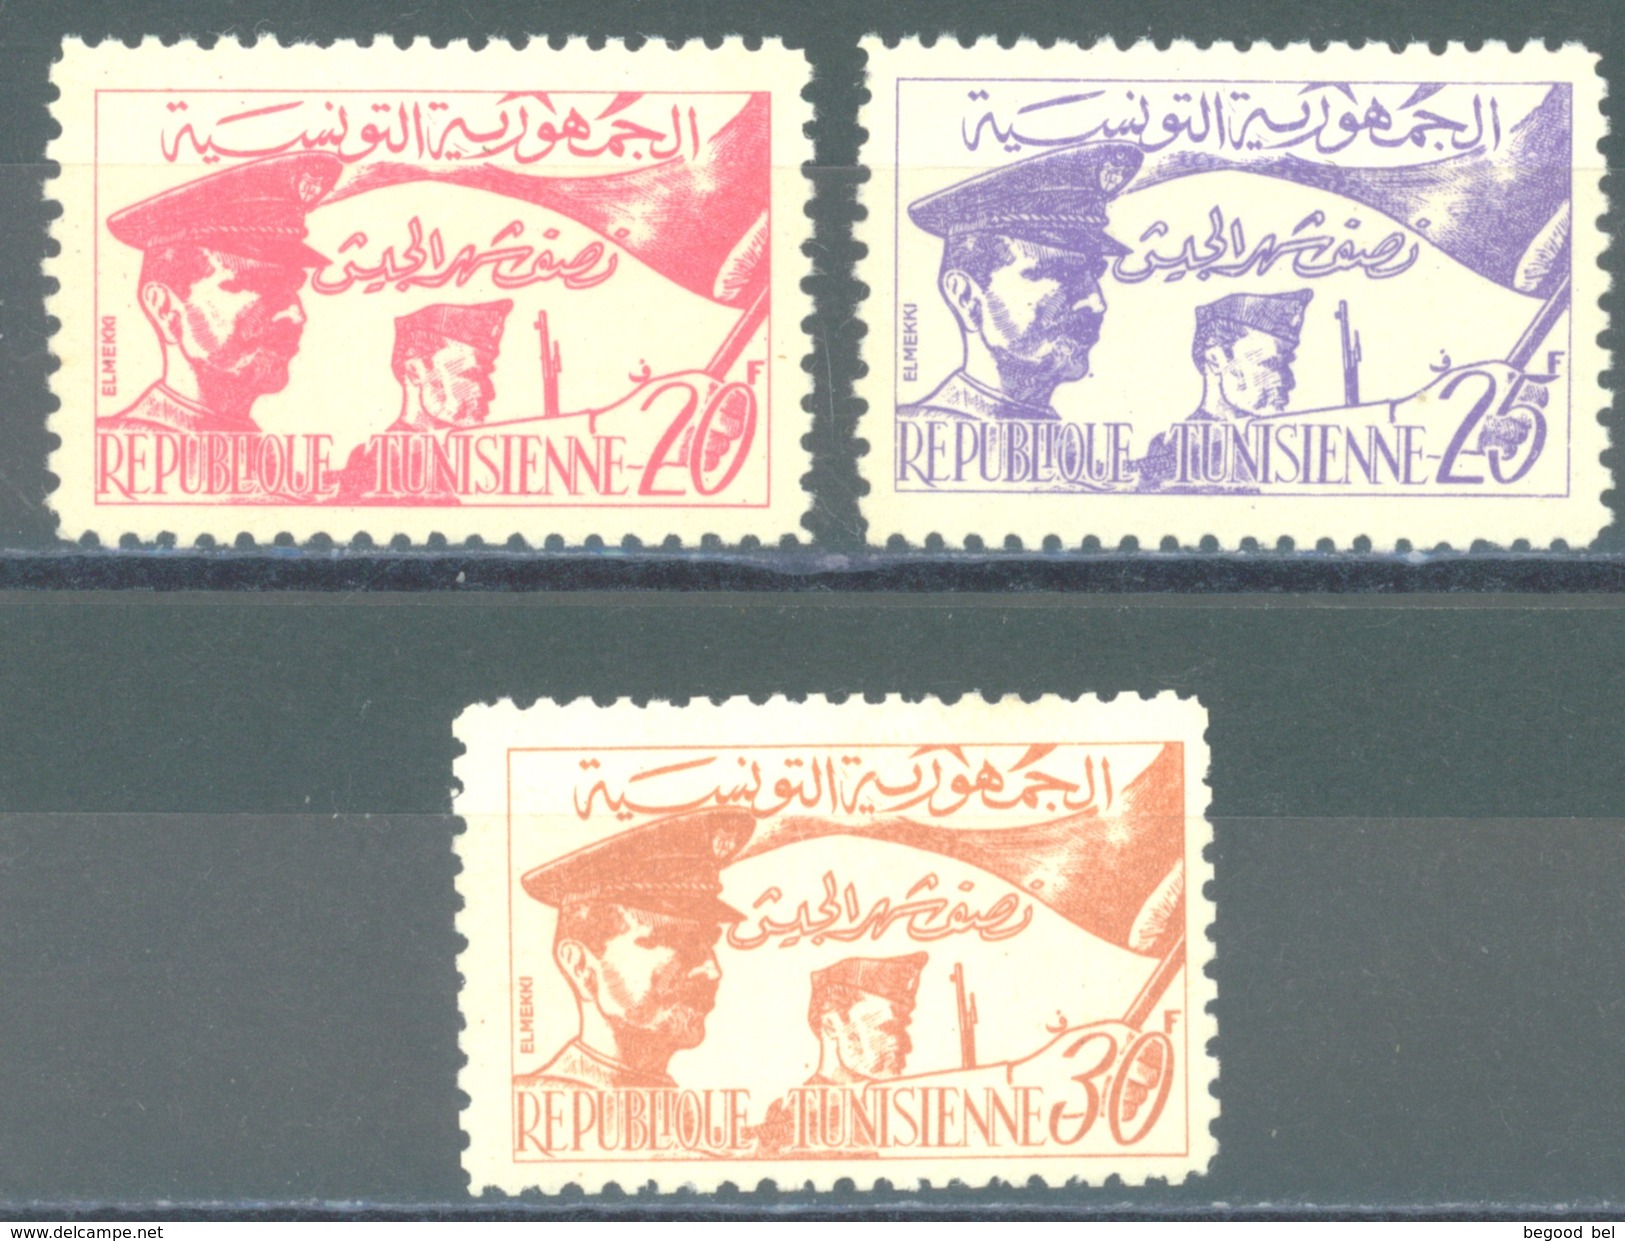 TUNISIE - 1957 - MNH/** 445 IS MLH/* AND GRATIS  - Yv 444-446  - Lot 15011 - Tunisie (1956-...)